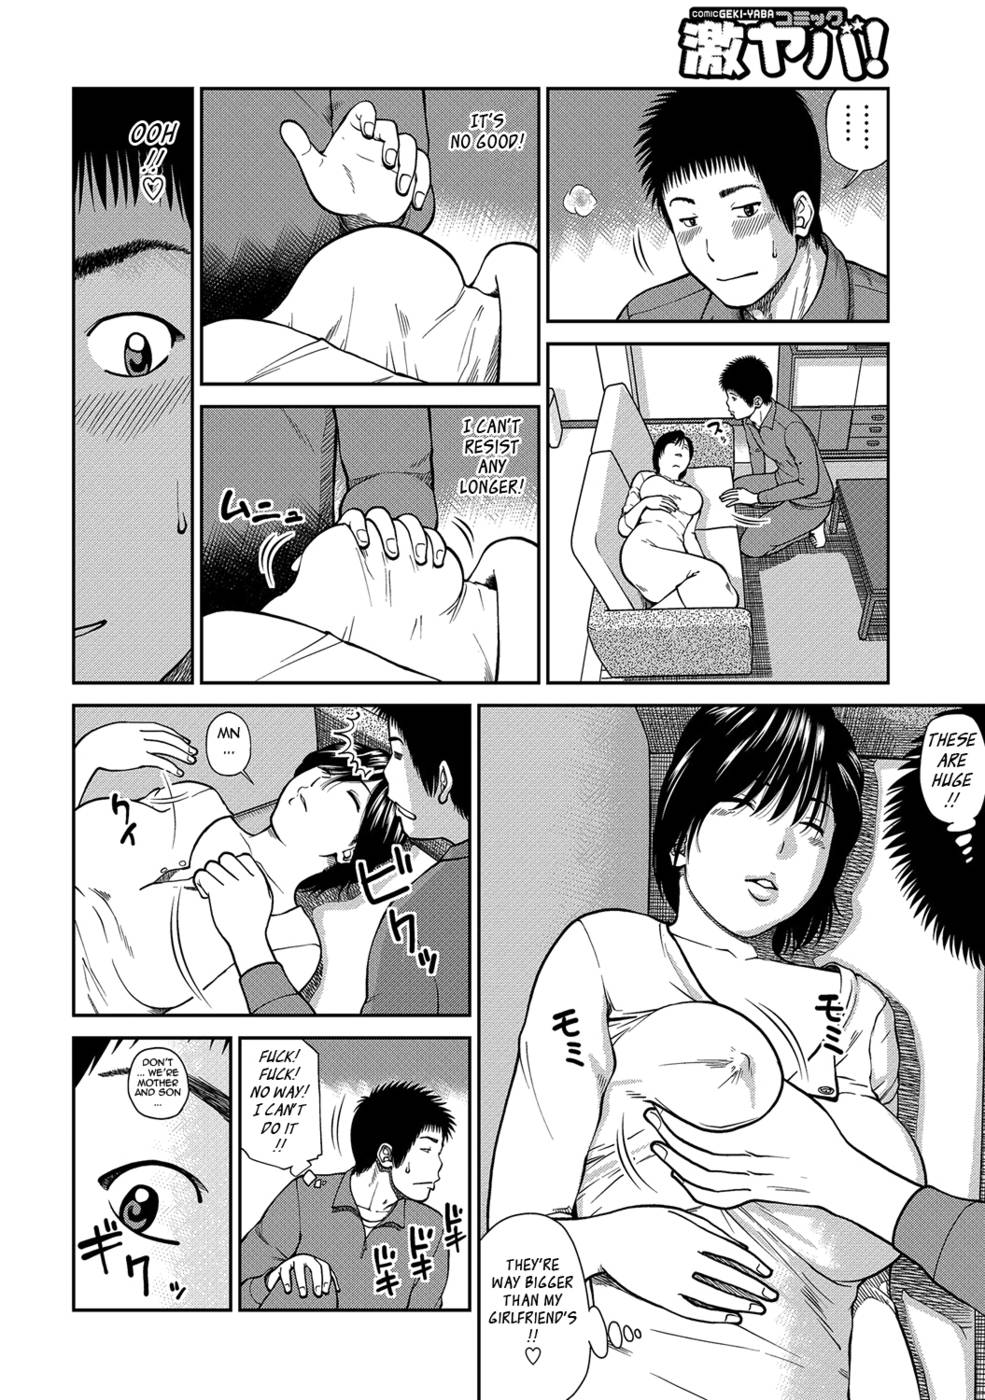 Hentai Manga Comic-34 Year Old Unsatisfied Wife-Chapter 7-Naked Stepmother-Second Half-4